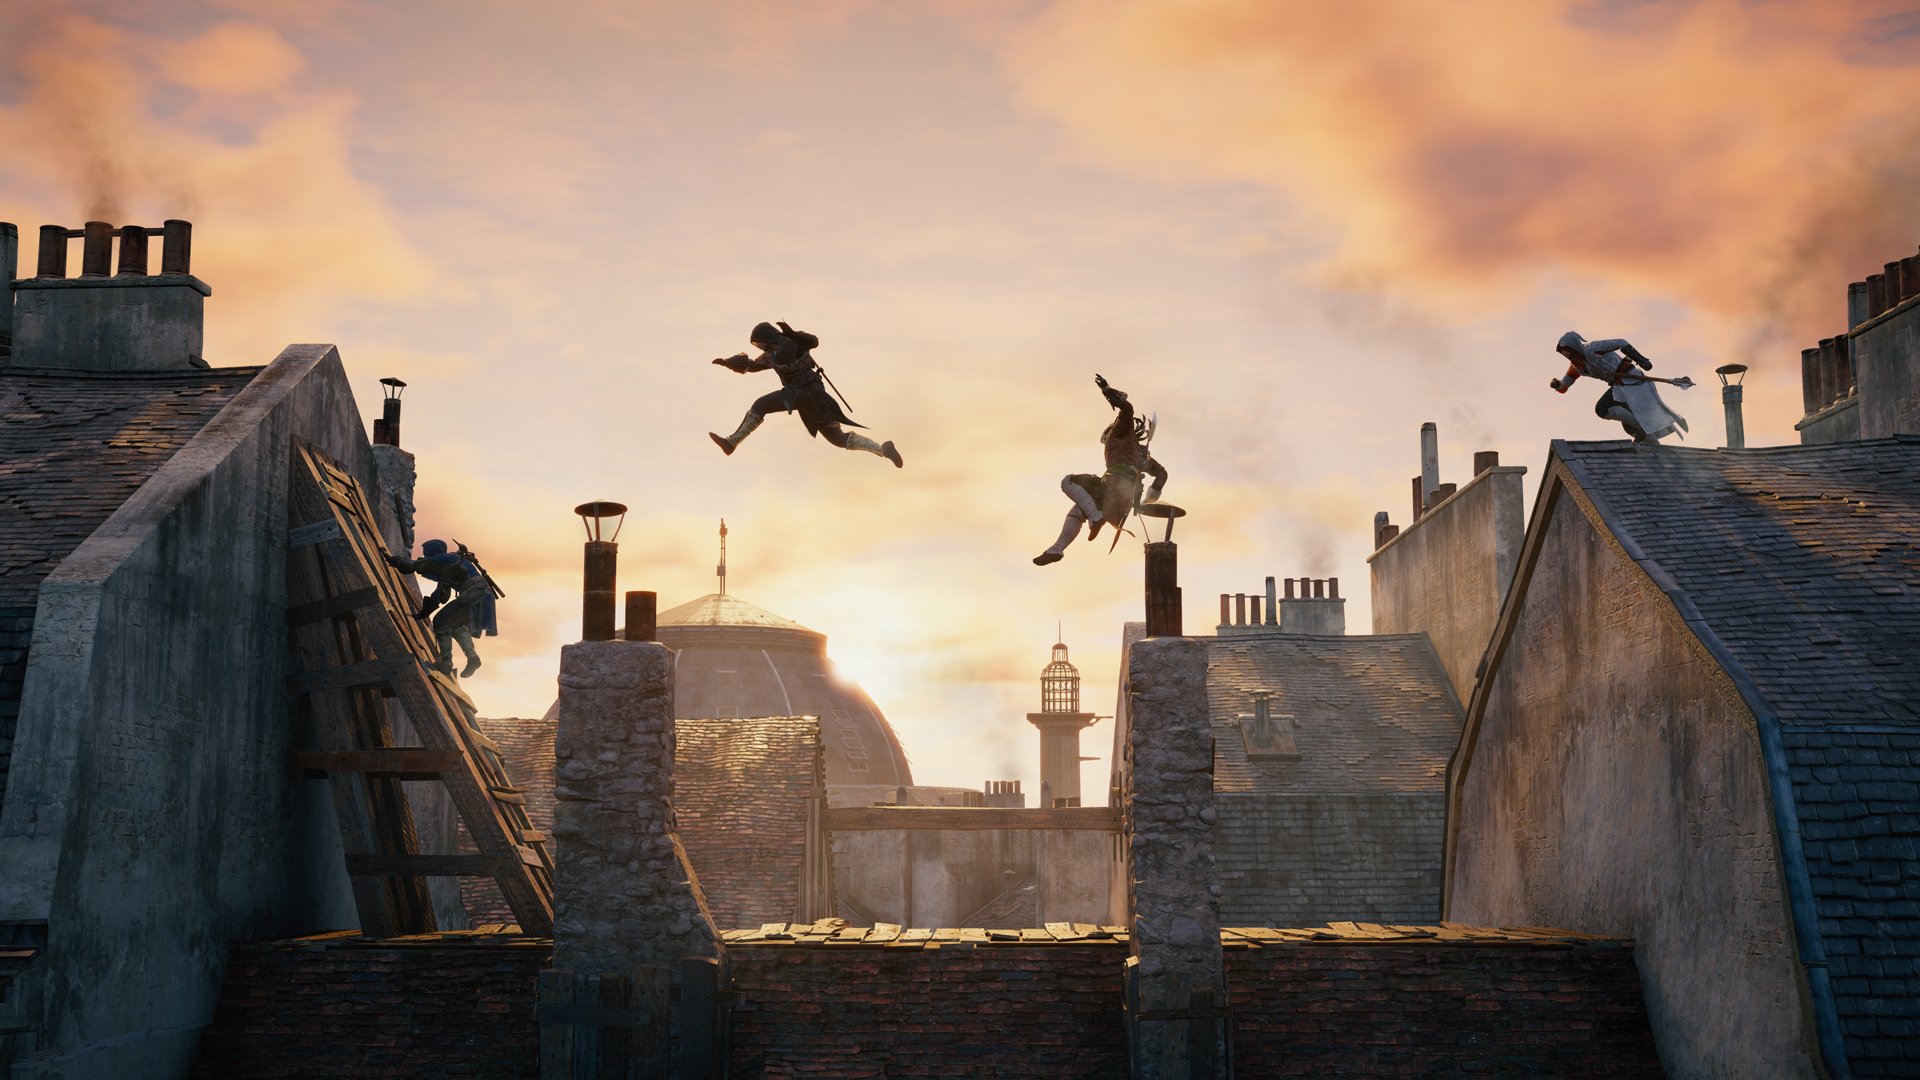 Horizontal Wallpaper assassin's creed: unity, assassin's creed, video game